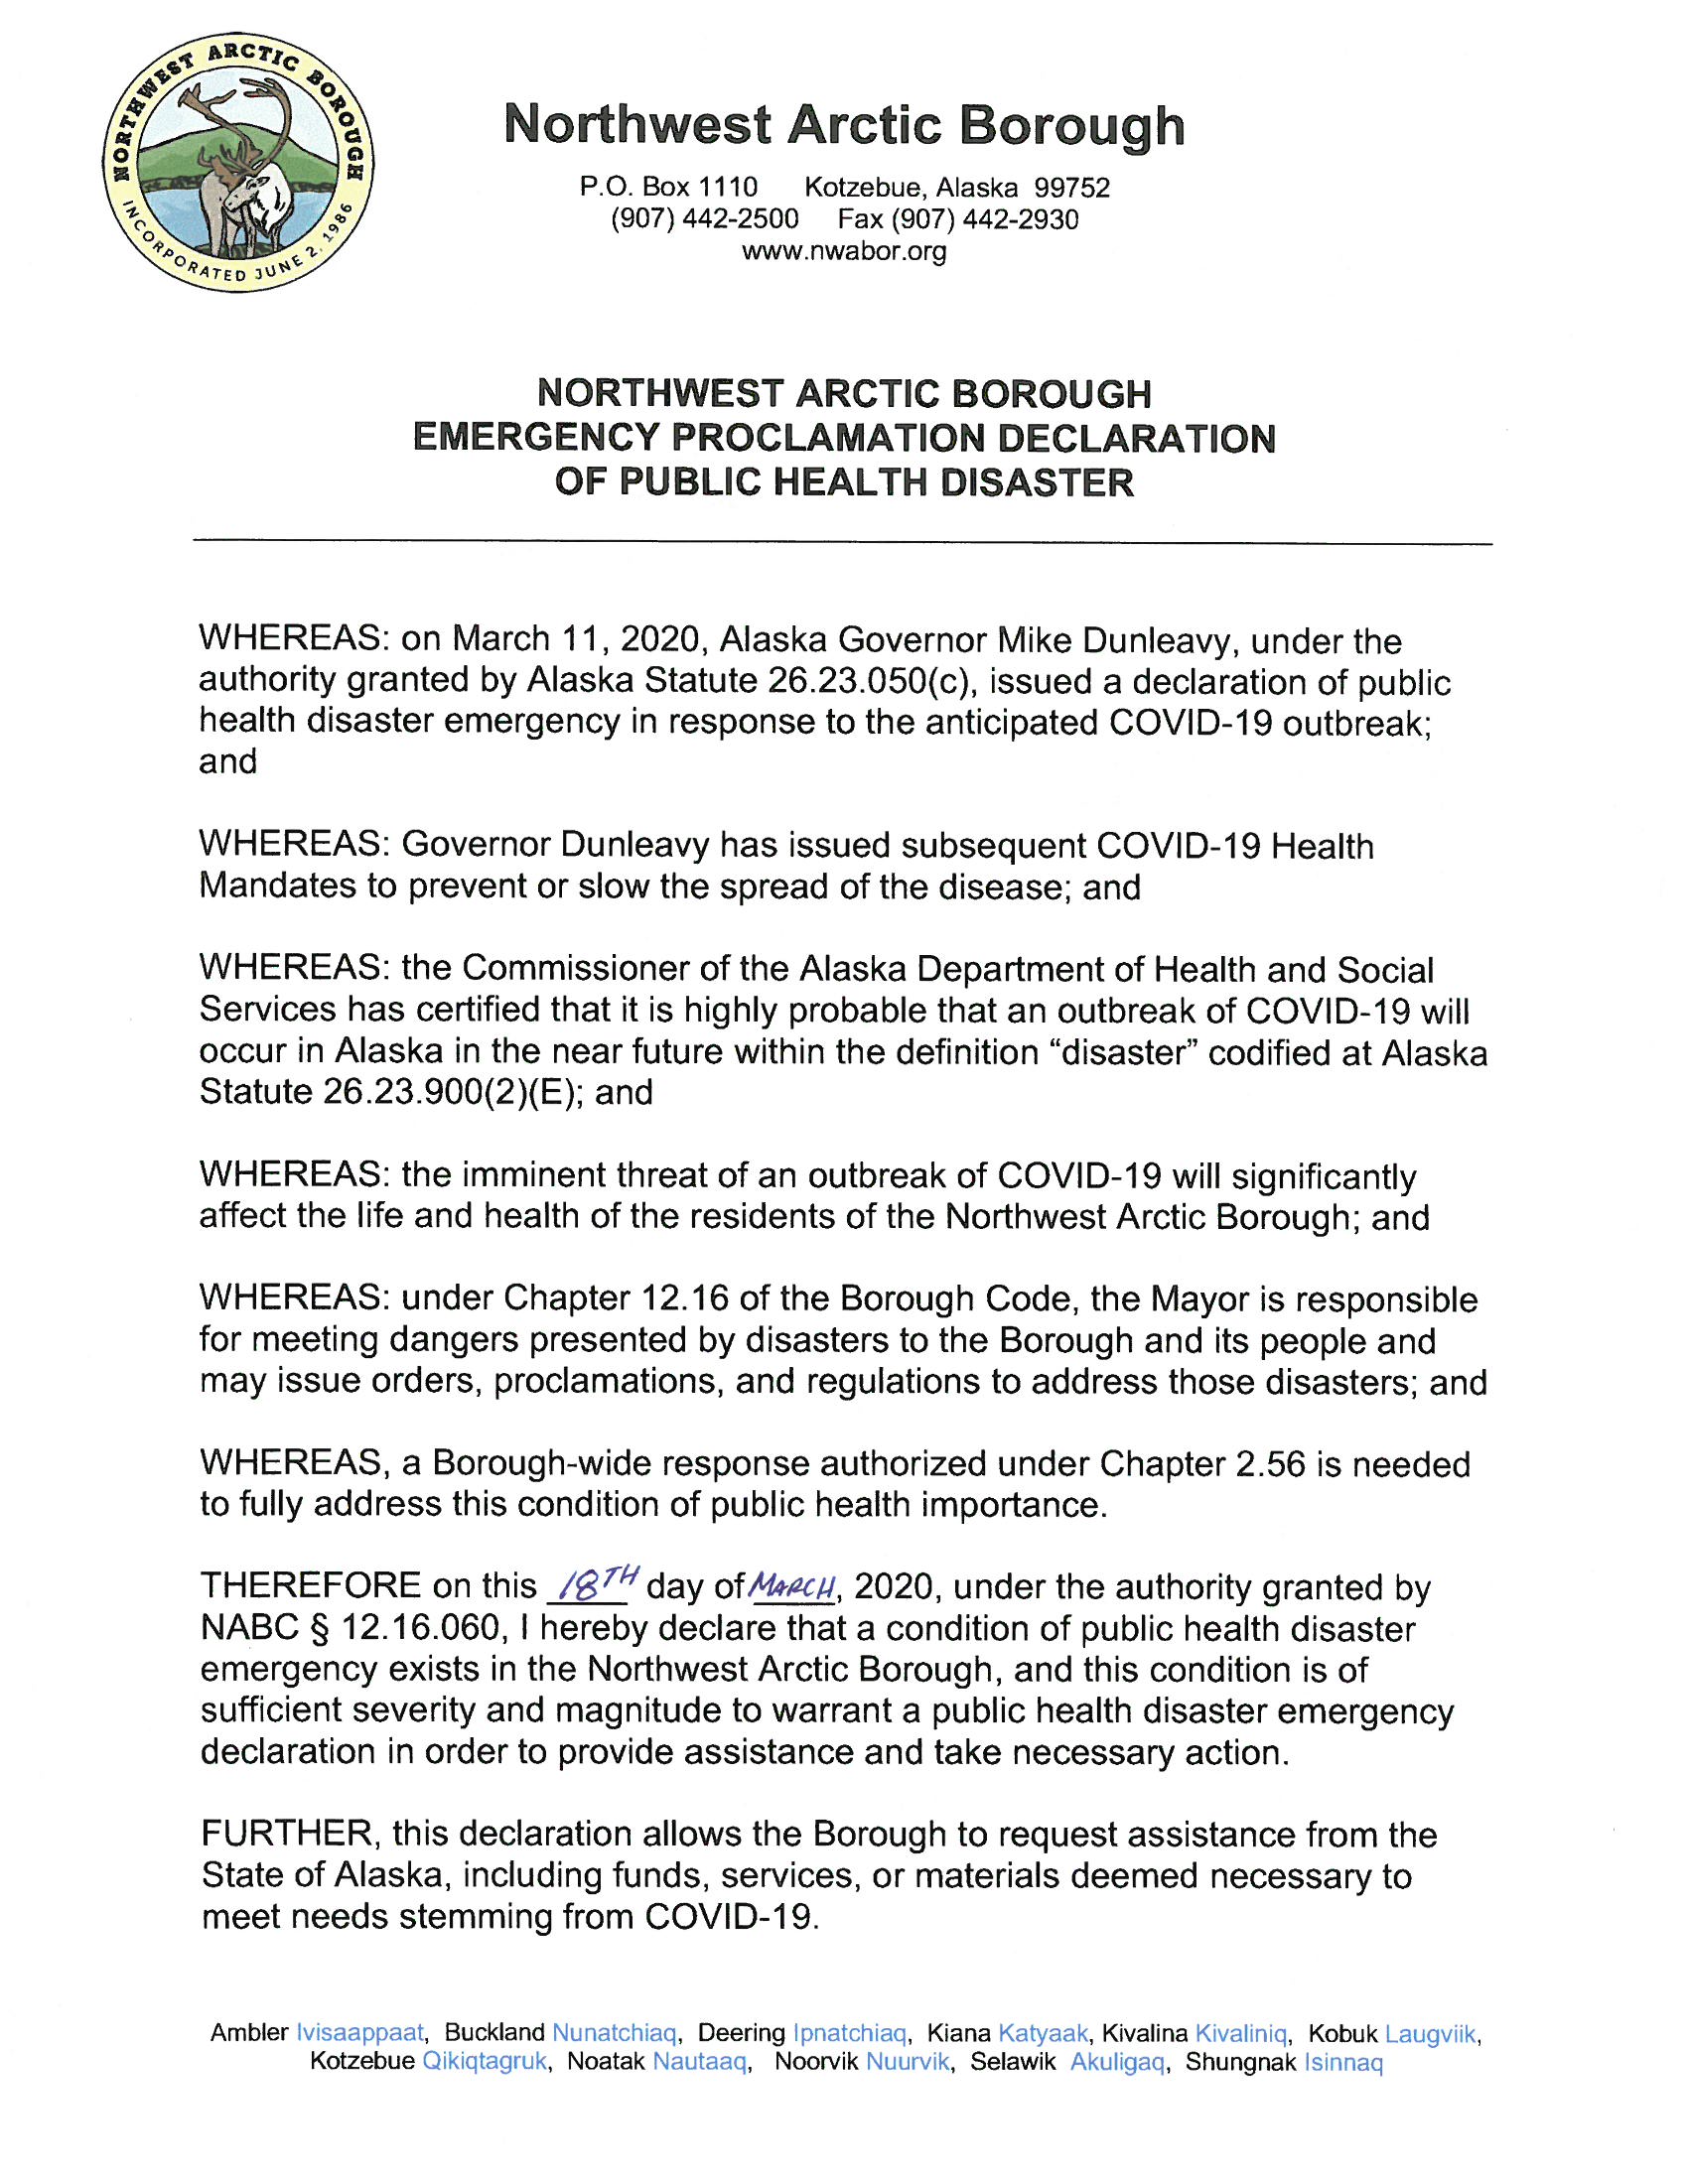 Notice of Declaration – Northwest Arctic Borough Mail From The Offices Of Records Of Declaration/disbursements Division